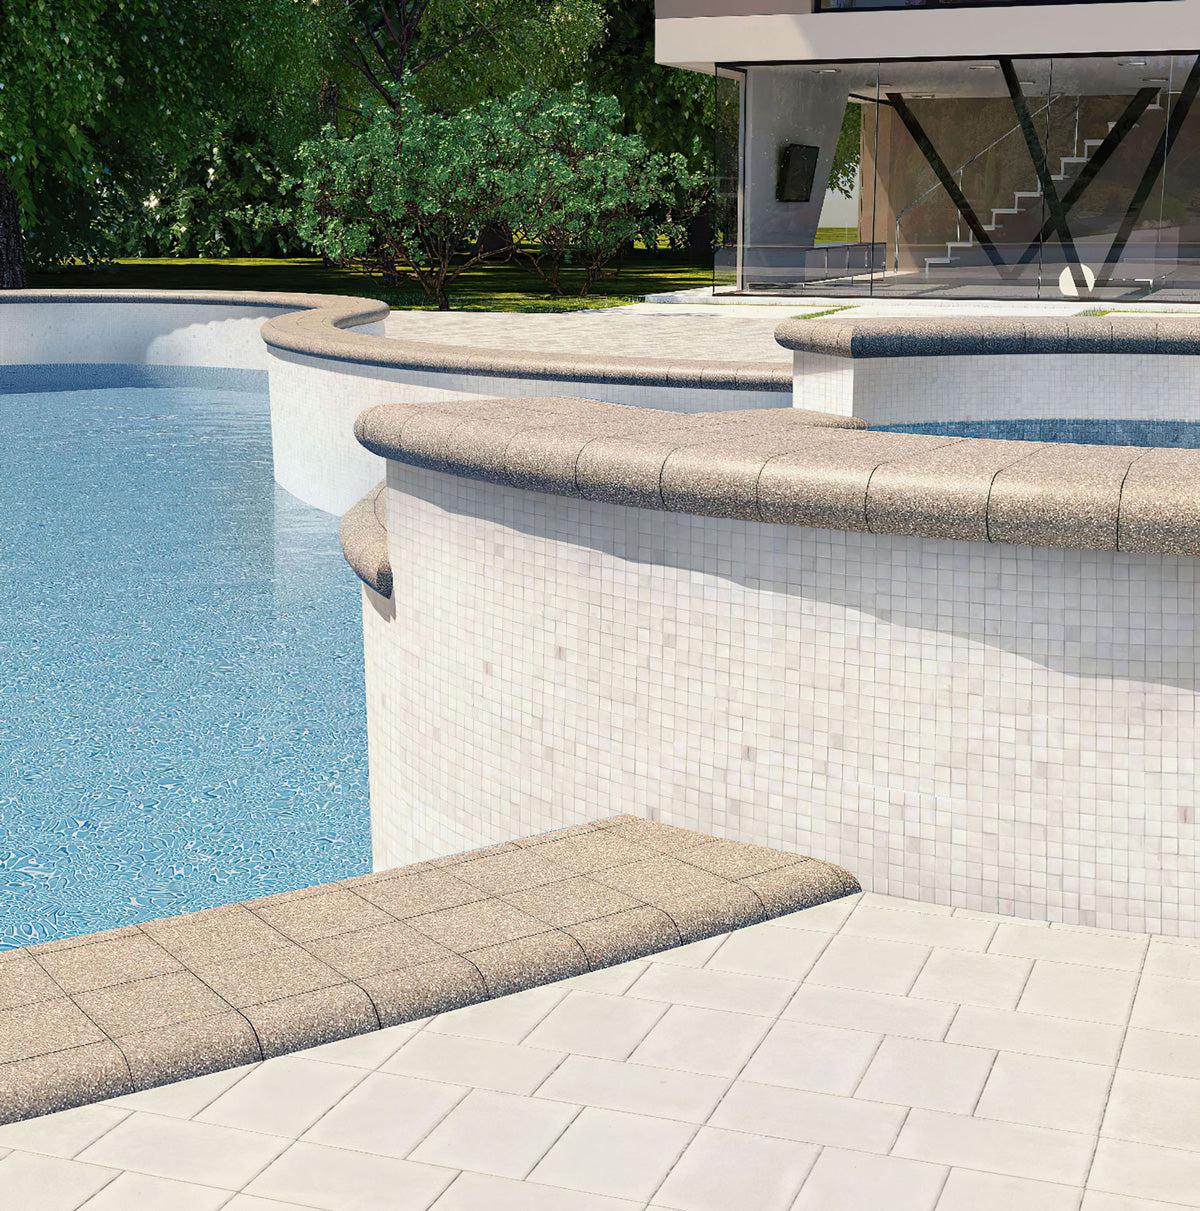 Outdoor swimming pool with curved walls covered with Ashy White Square Glass Pool Tile